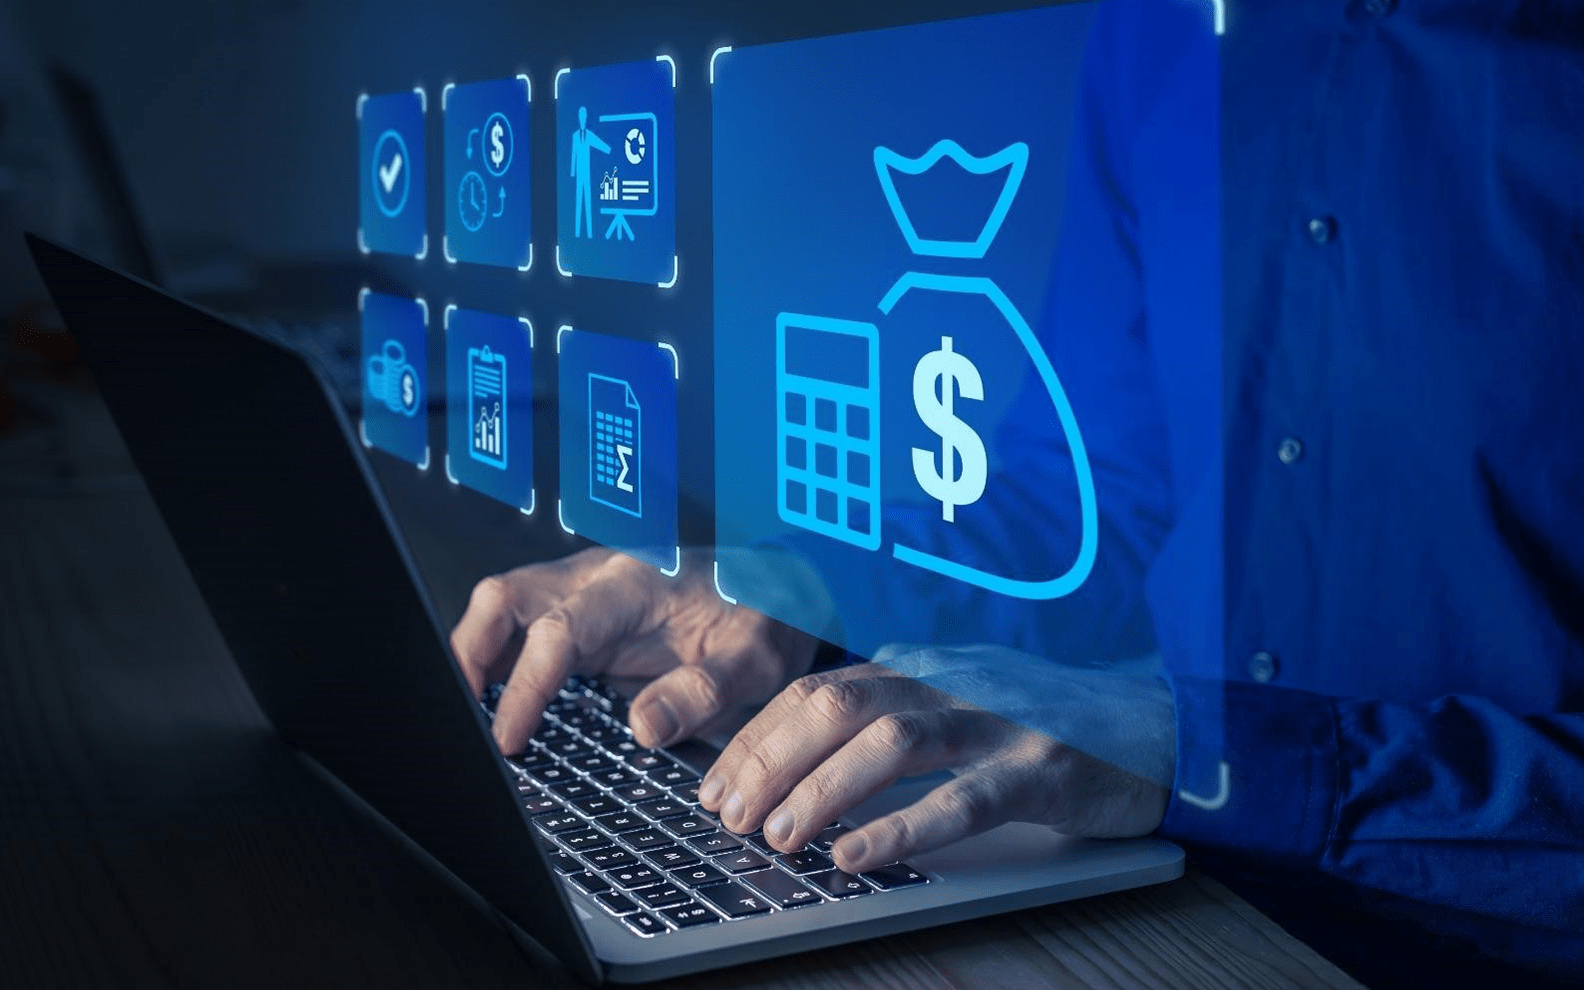 Person in a blue shirt using a laptop with holographic images of financial icons floating above the keyboard.